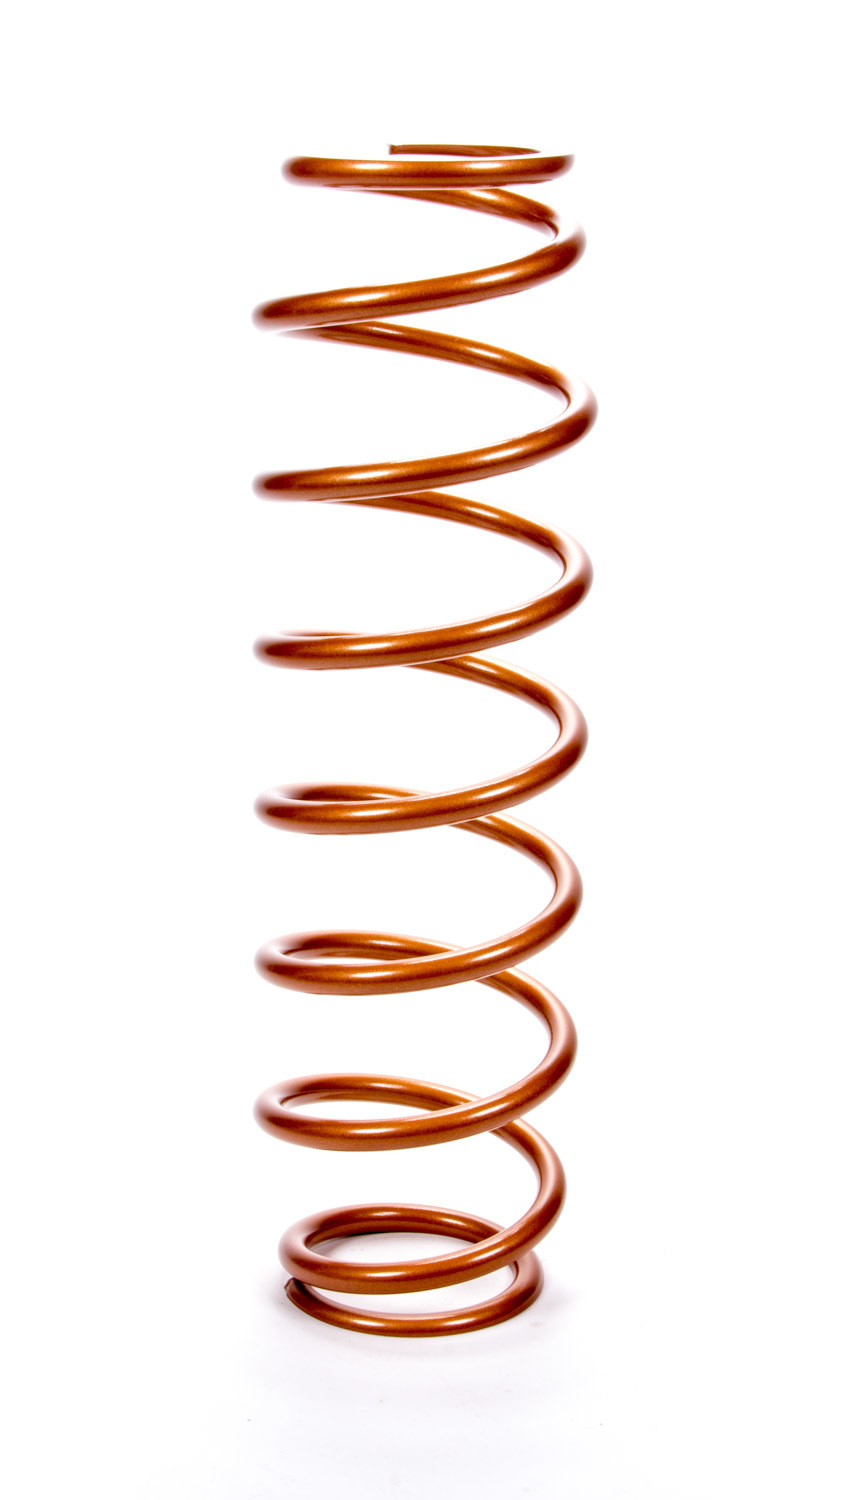 Swift Springs 140-250-100BP Coil Spring, Barrel, Coil-Over, 2.500 in ID, 14.000 in Length, 100 lb/in Spring Rate, Steel, Copper Powder Coat, Each